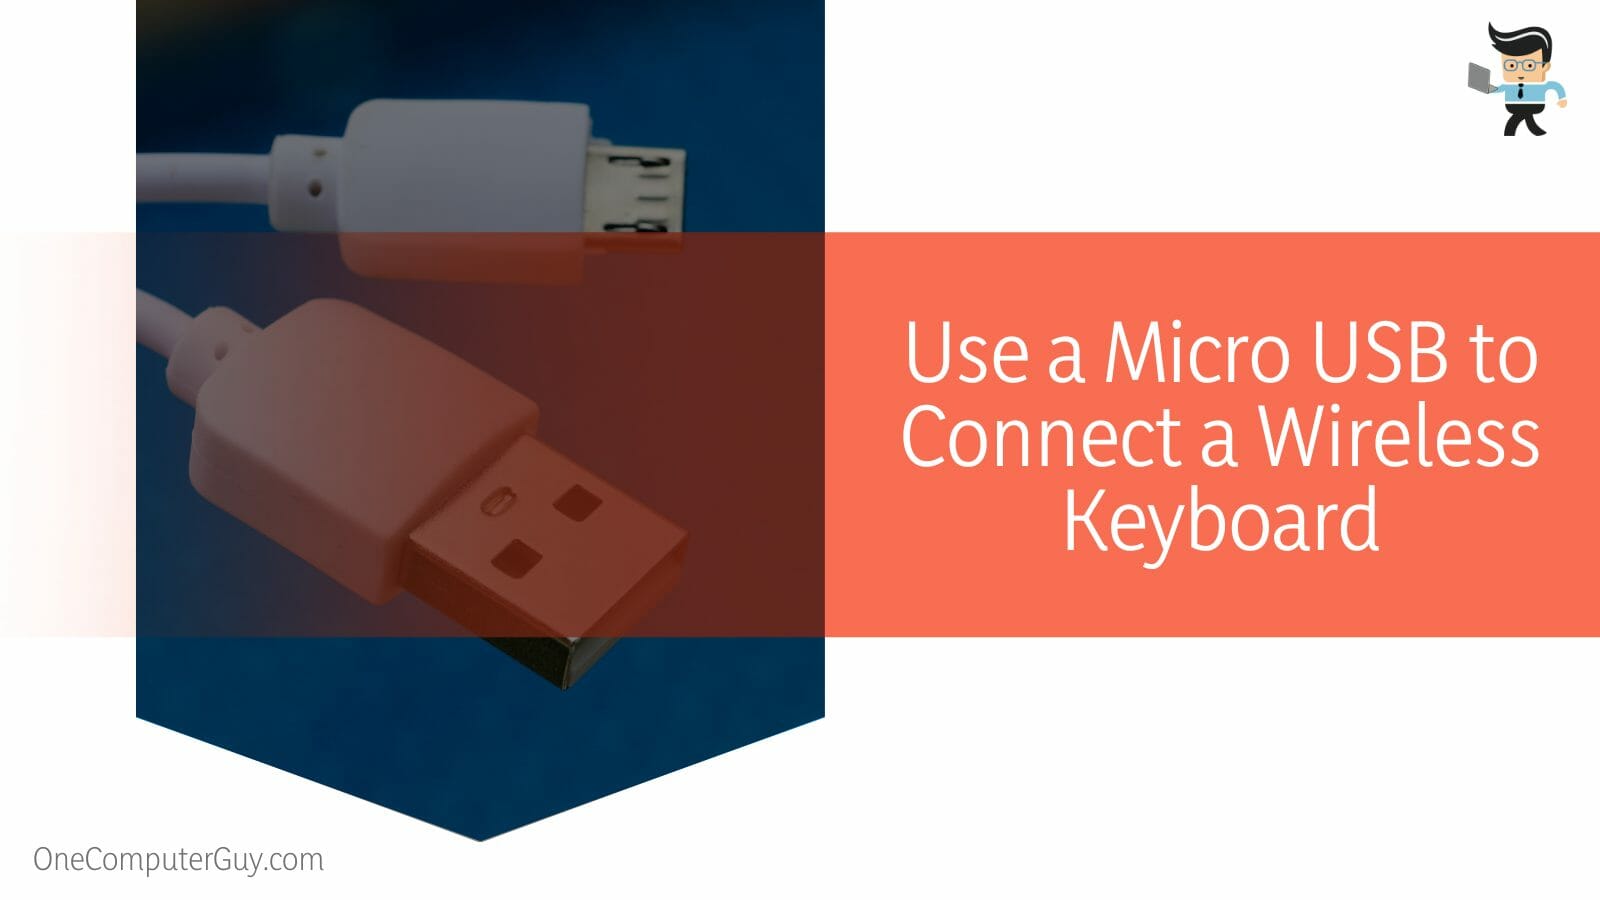 Use a Micro USB to Connect a Wireless Keyboard